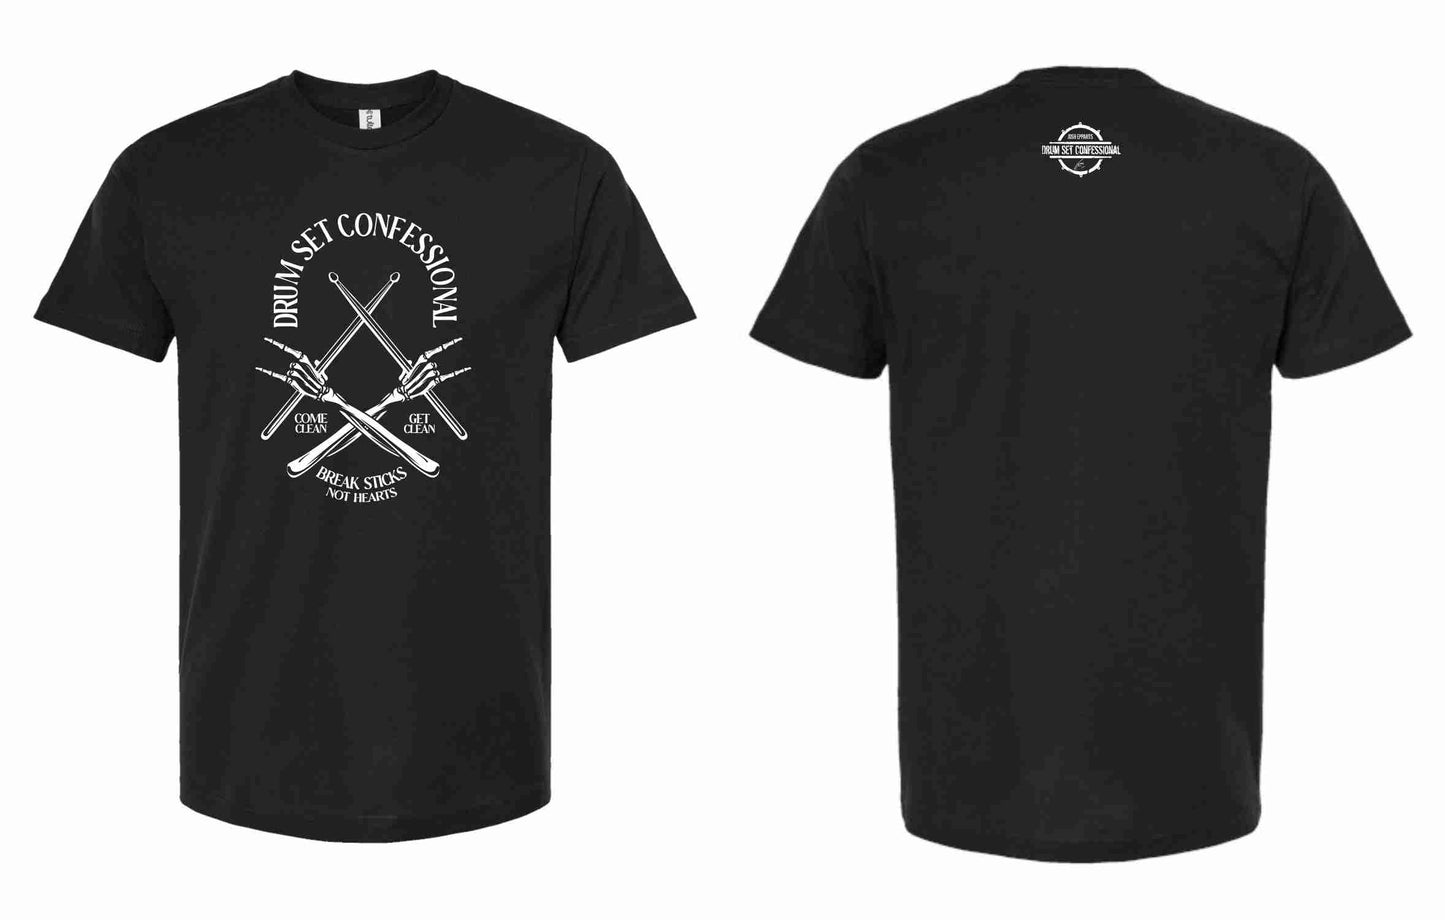 DSC "Bones" Tultex T-Shirt (100% of profits fuel outreach and donations to addiction/recovery causes.)